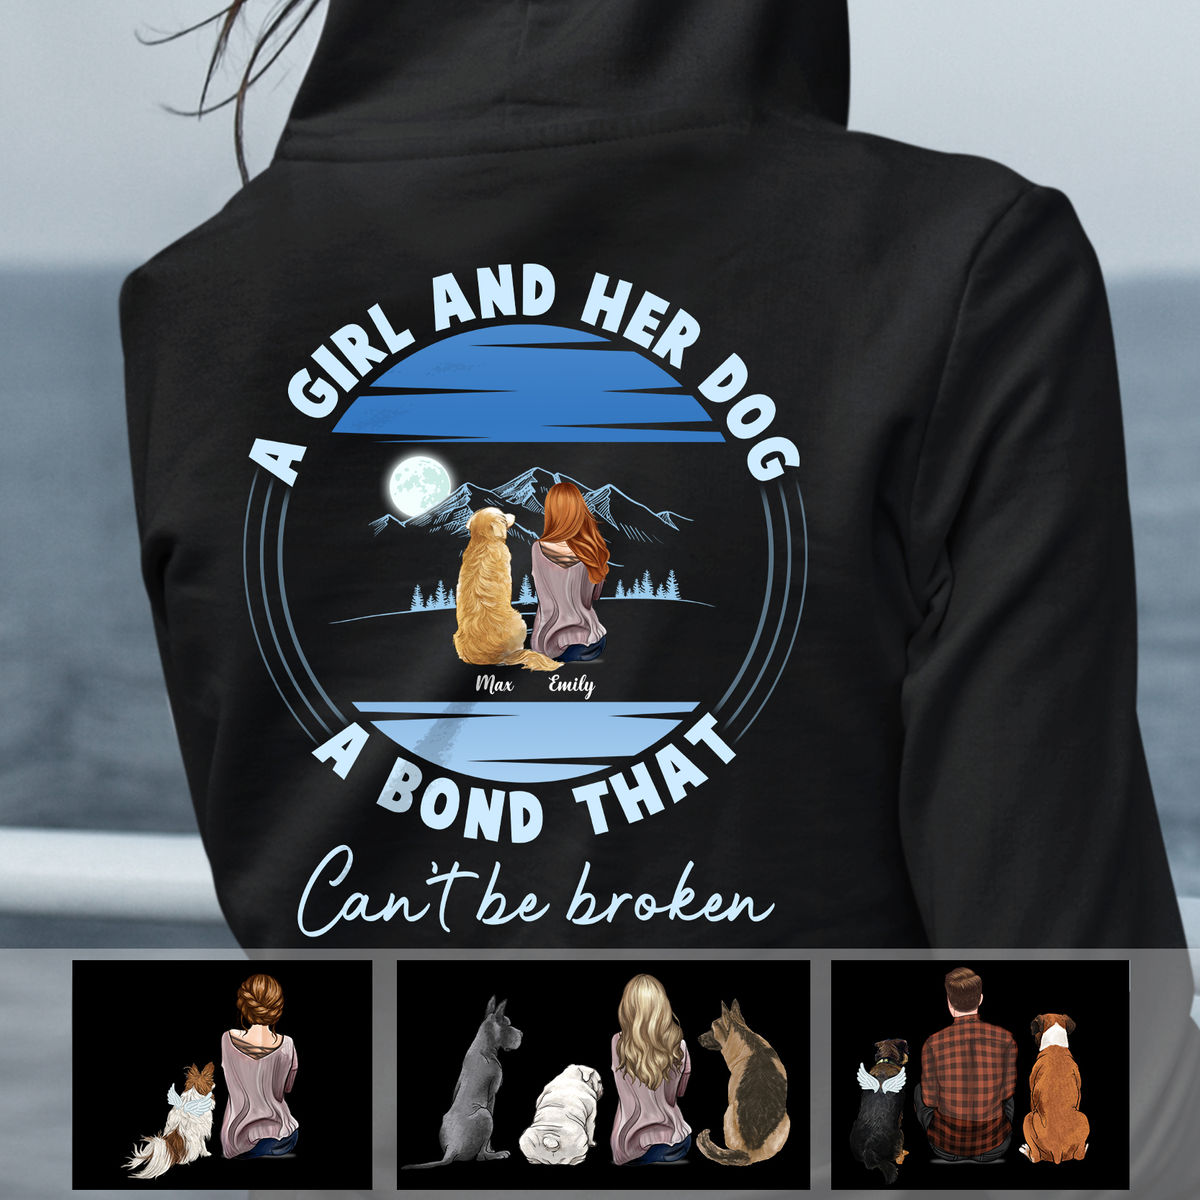 Mother's Day Gift - A girl and her dog, a bond that can't be broken (Custom Hoodies - Christmas Gifts for Women, Men)